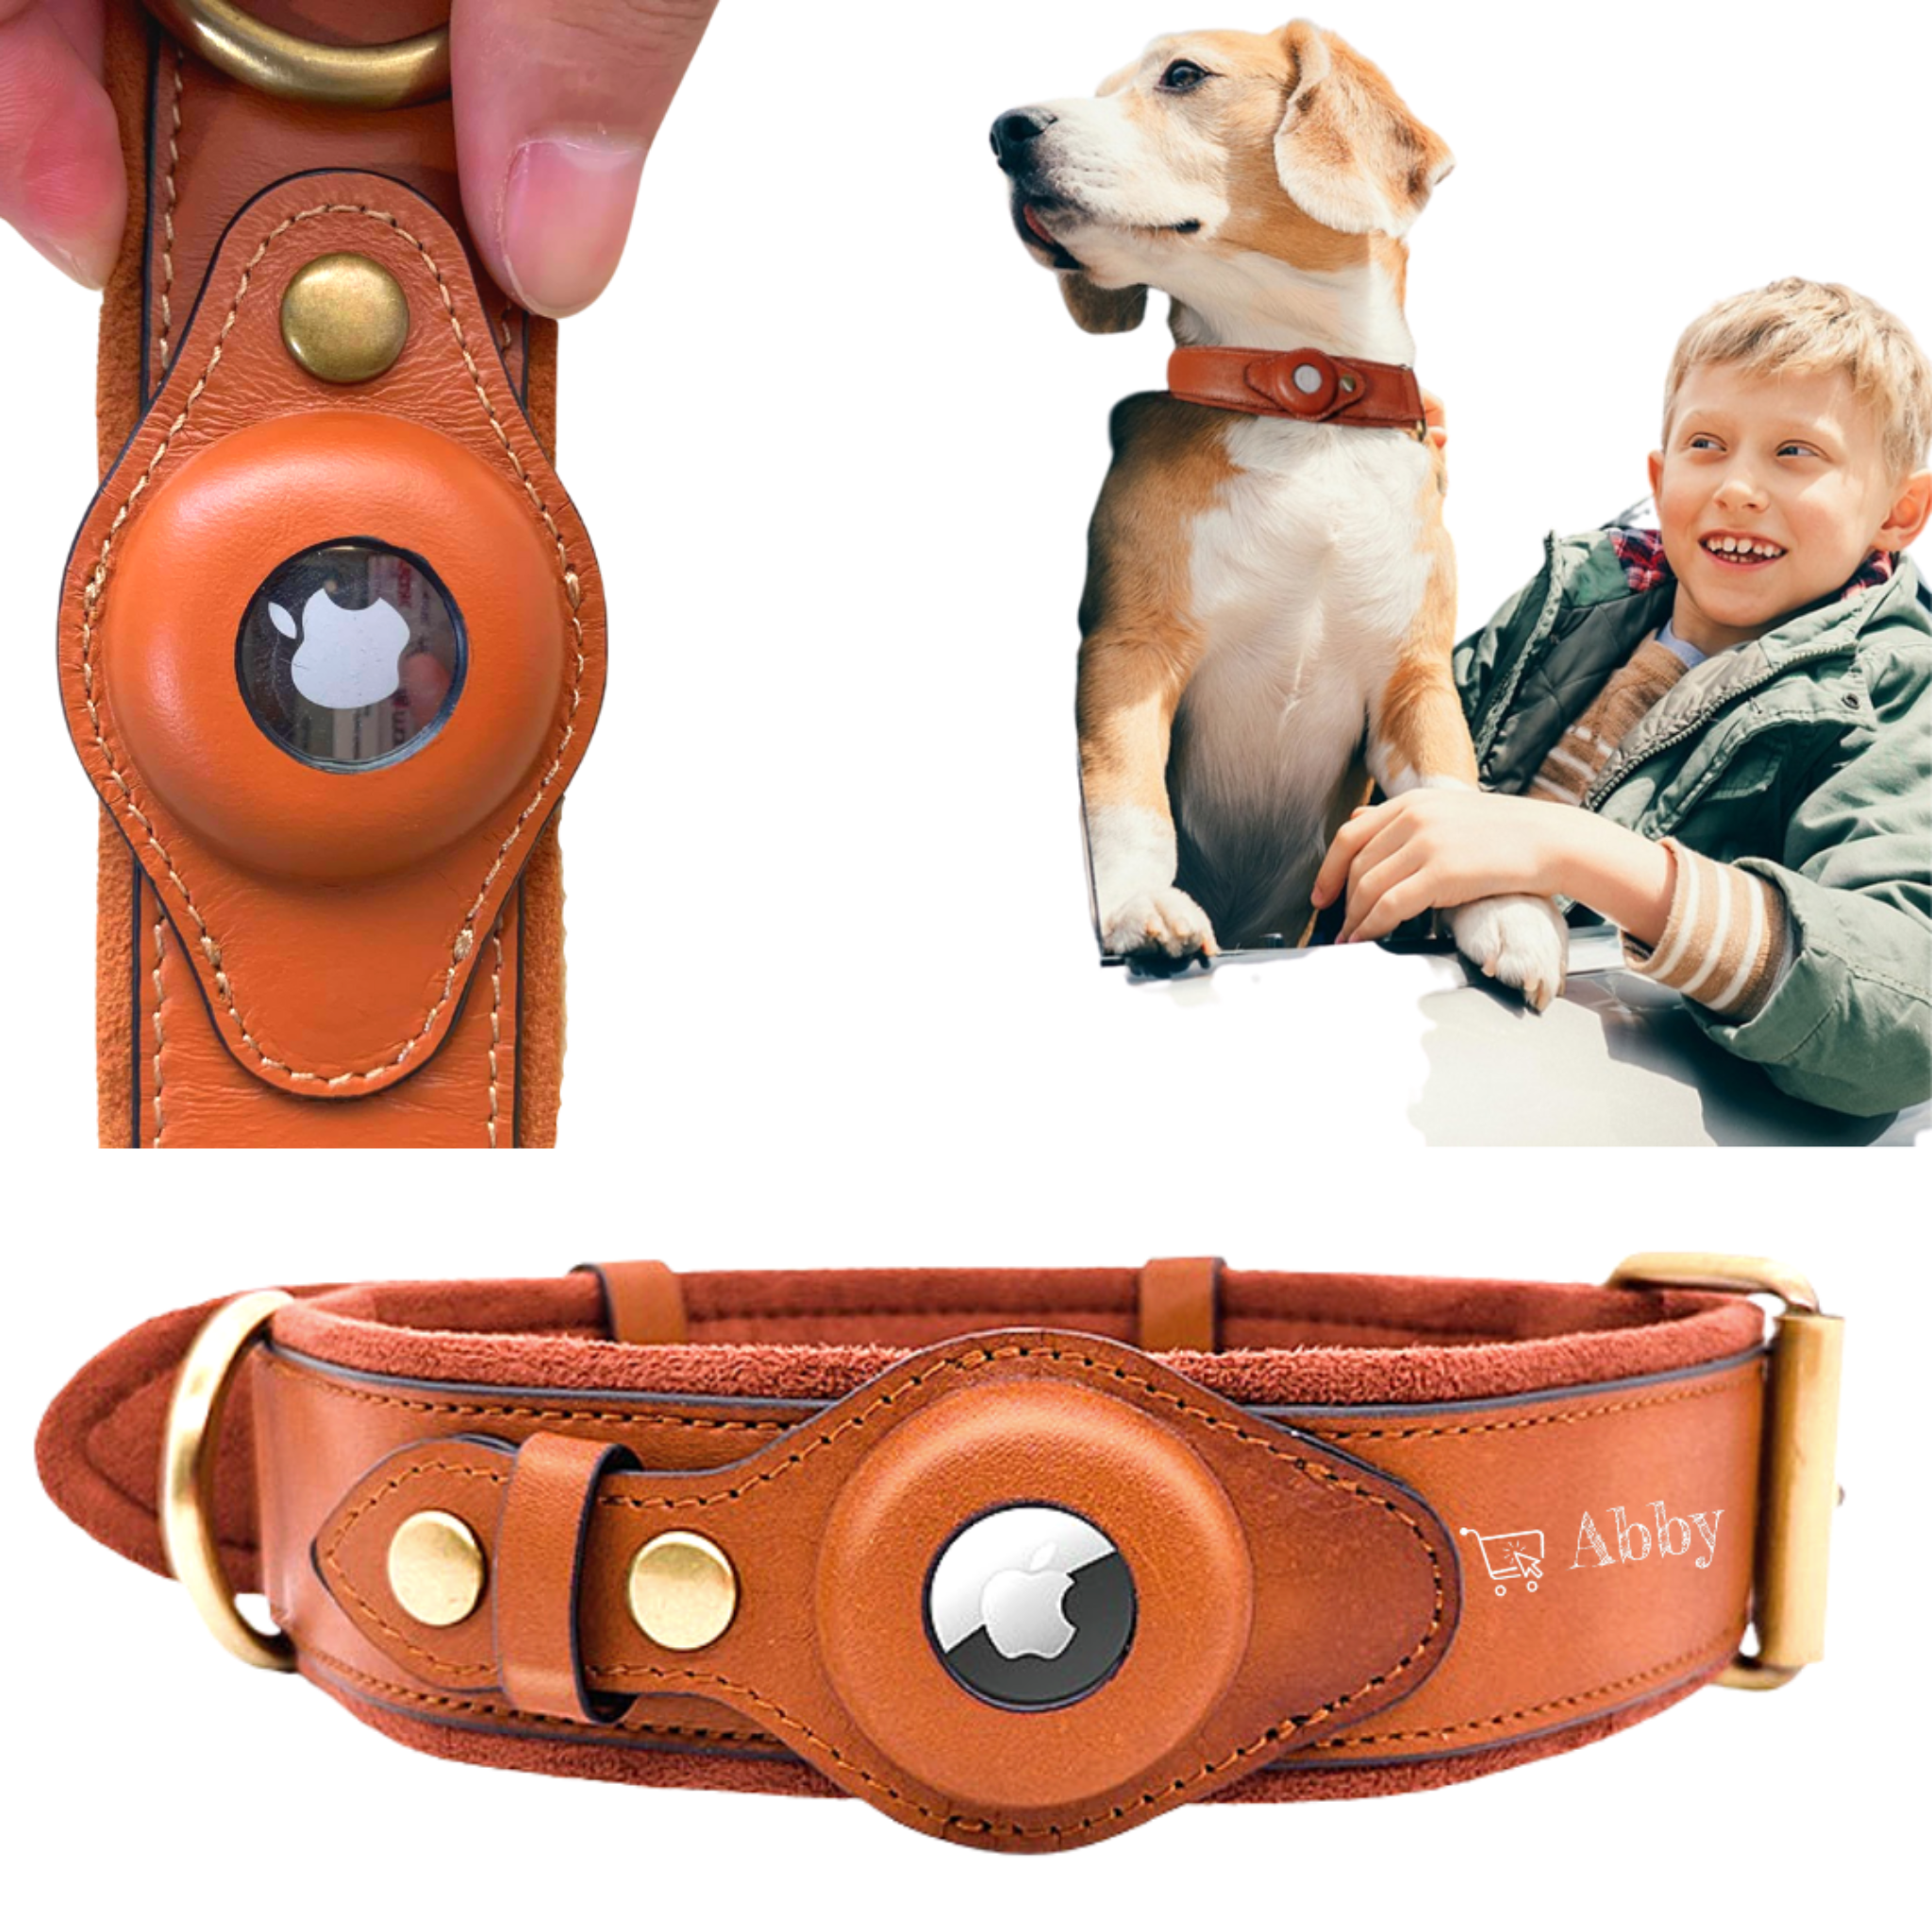 Abby’s Apple AirTag Leather Dog Collar for your Pet - GPS Tracking - Abbycart